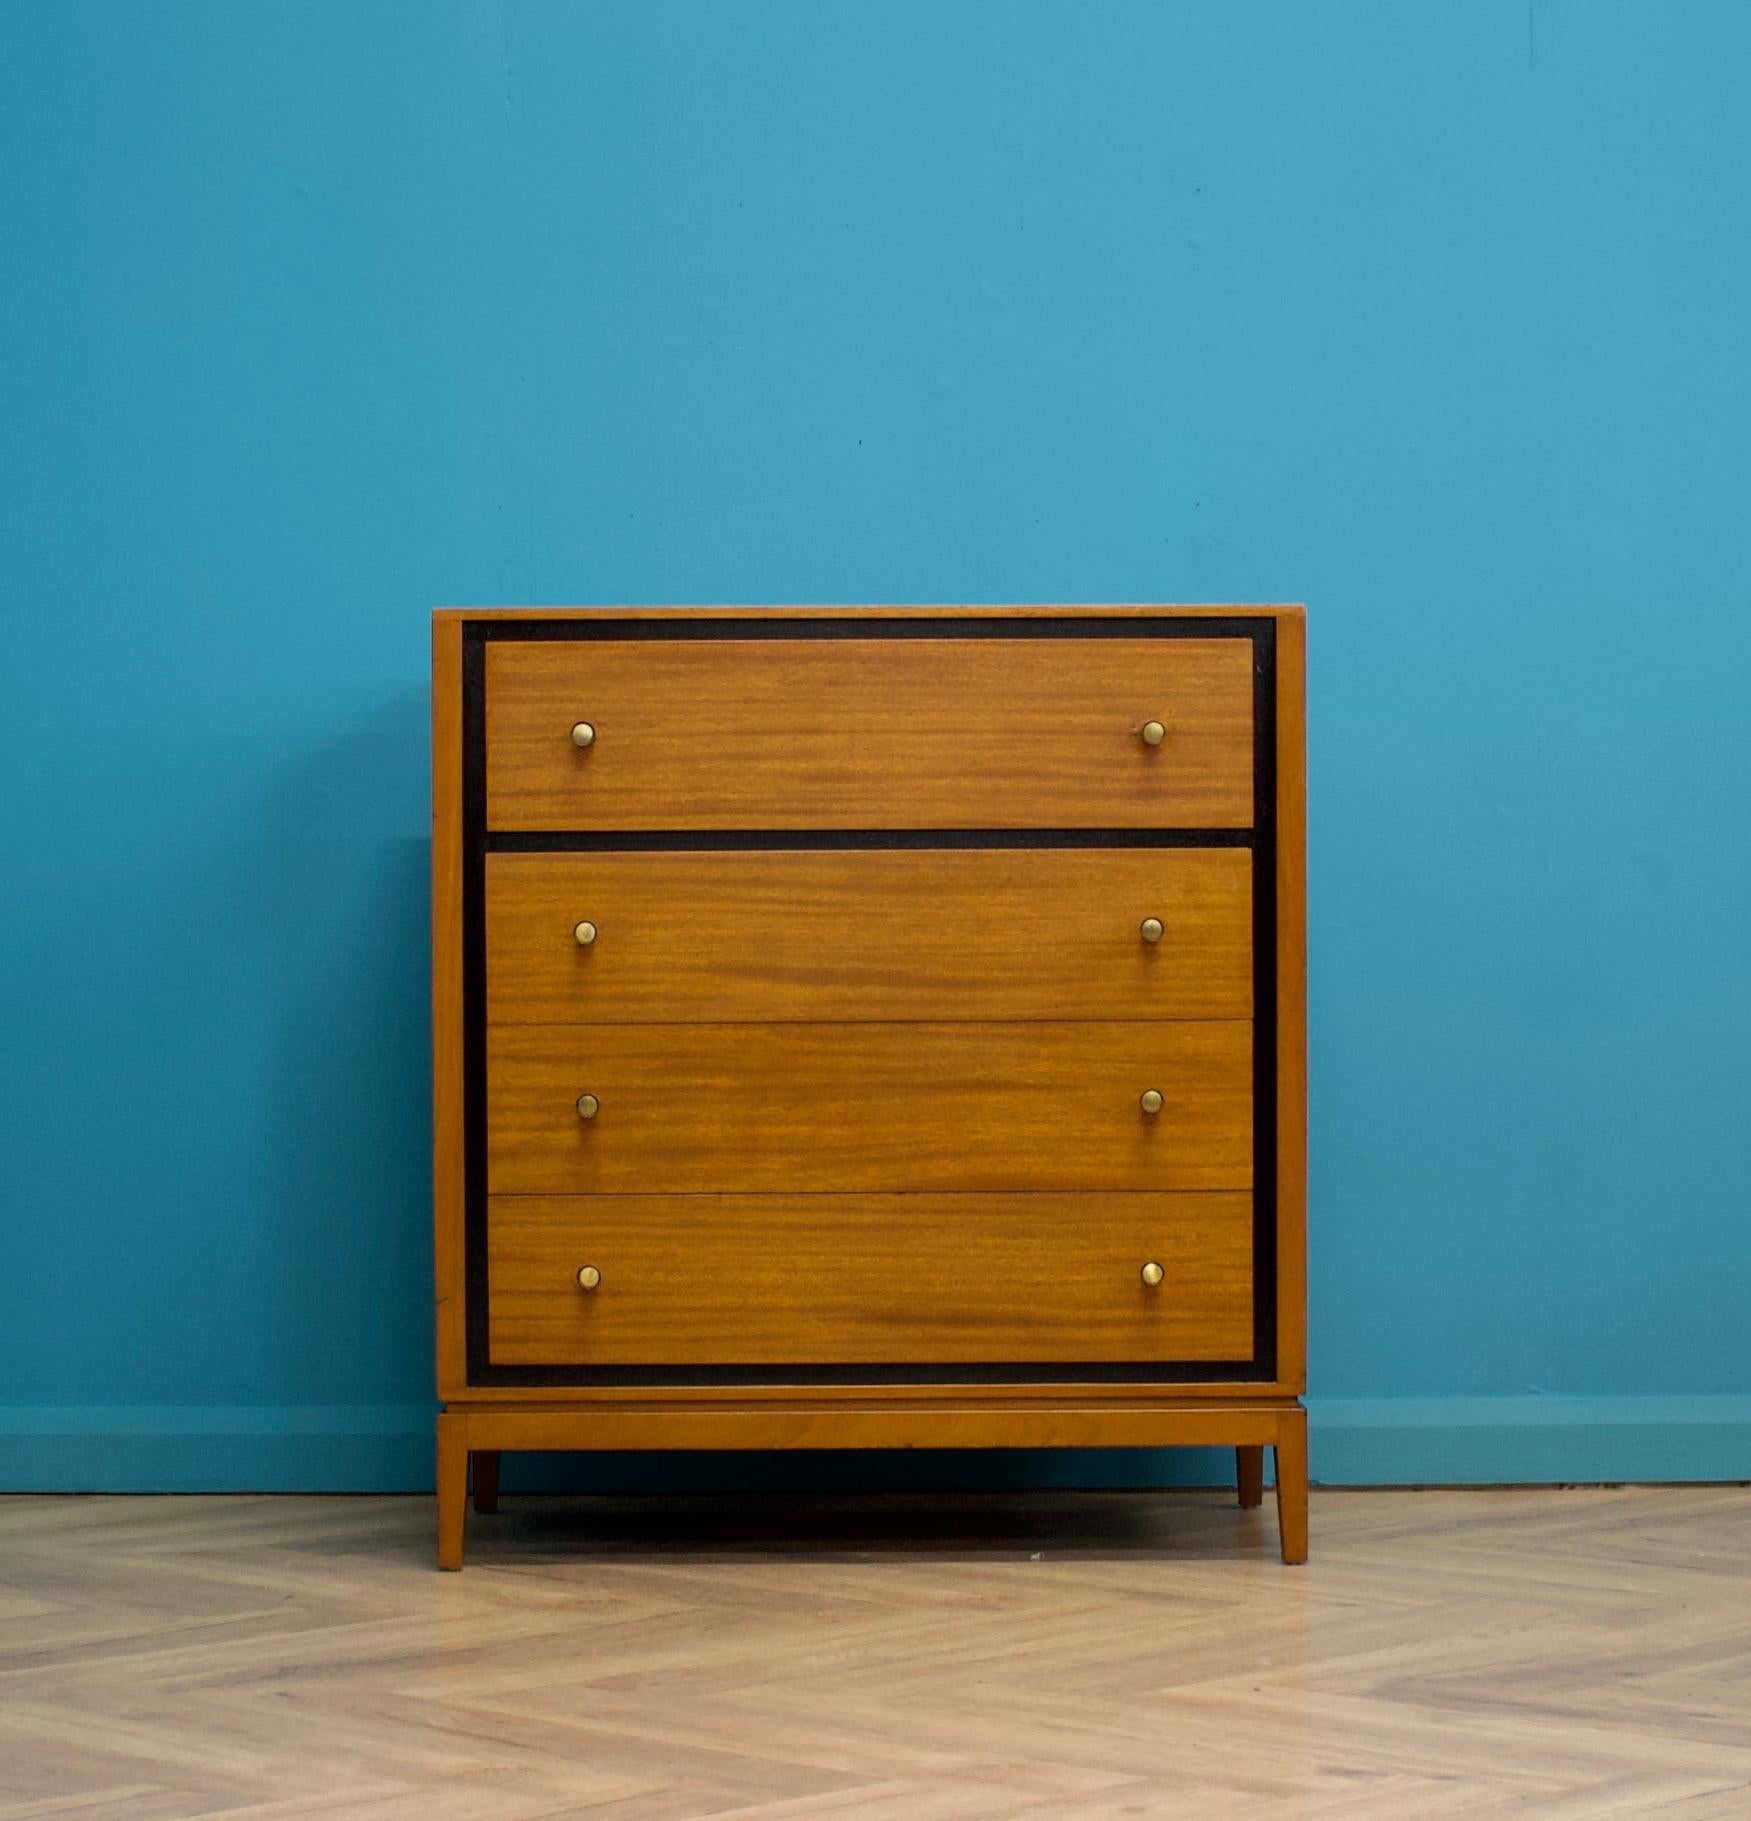 A teak & mahogany chest of drawers from Loughborough Furniture - retailed through Heals during the 1950s
With an ebonised trim

Featuring four drawers


The matching tallboy is listed for sale separately 